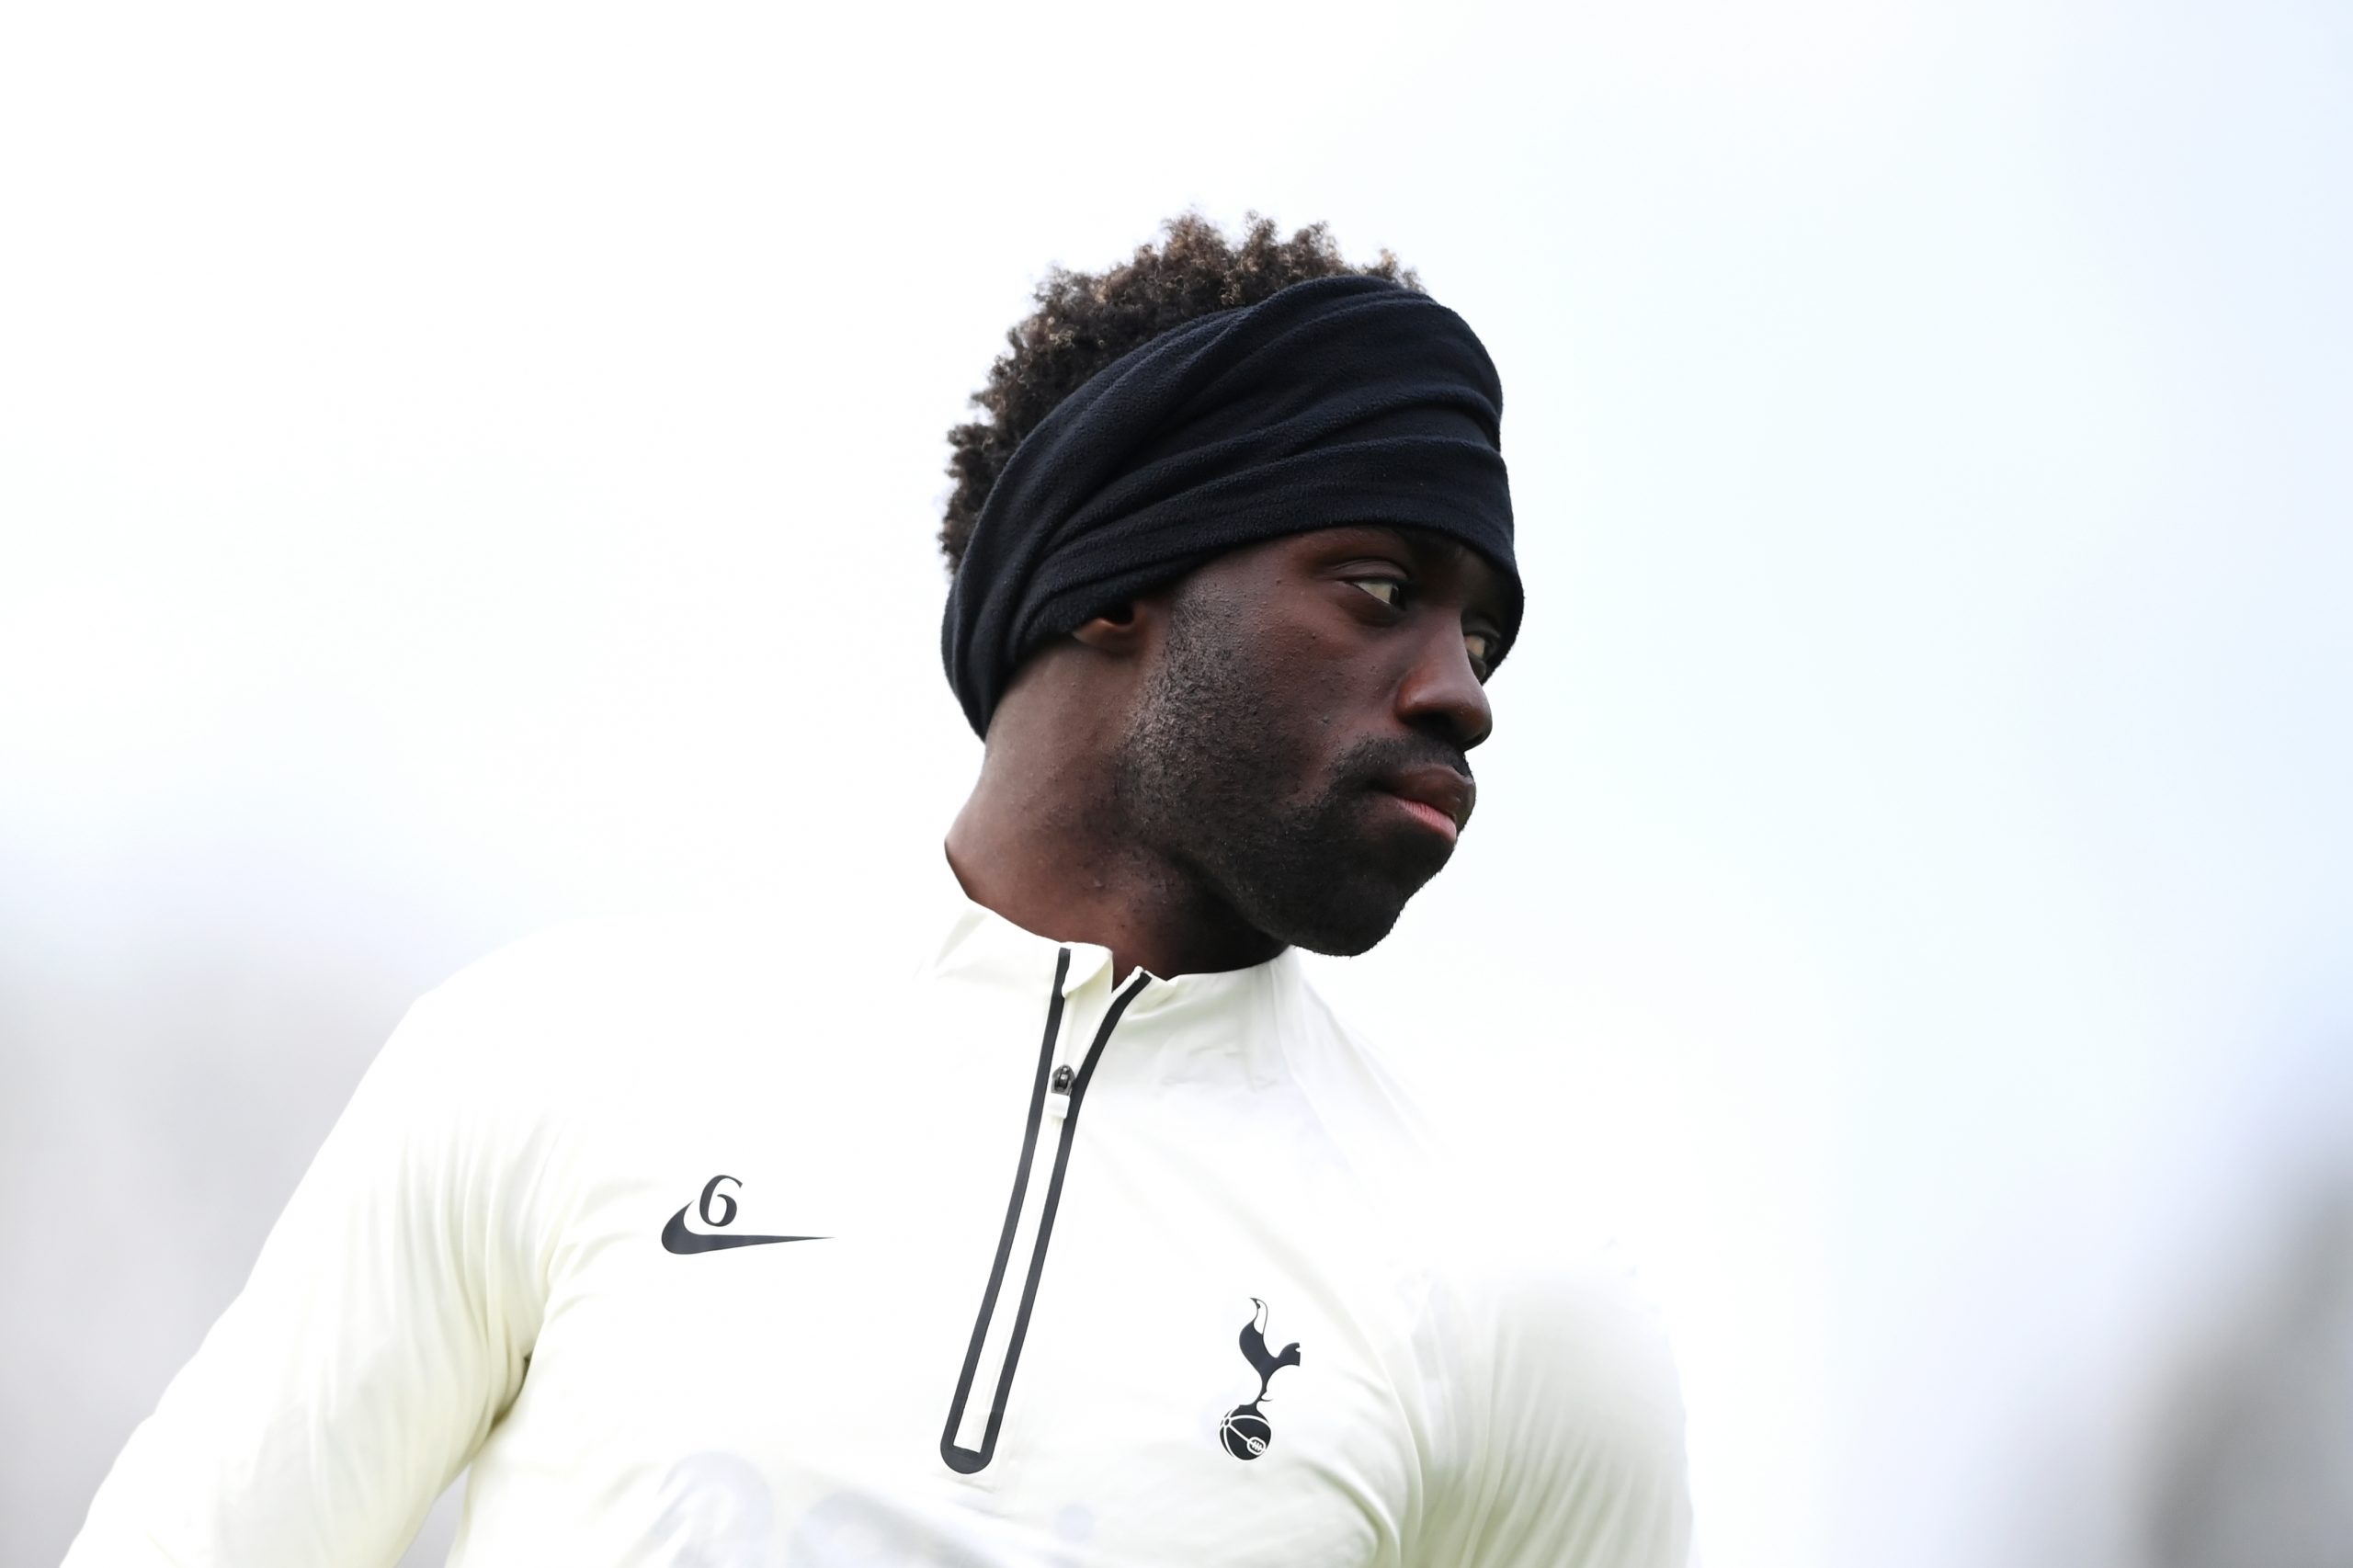 Rudy Galetti confirms that Tottenham have an agreement to sell Davinson Sanchez.